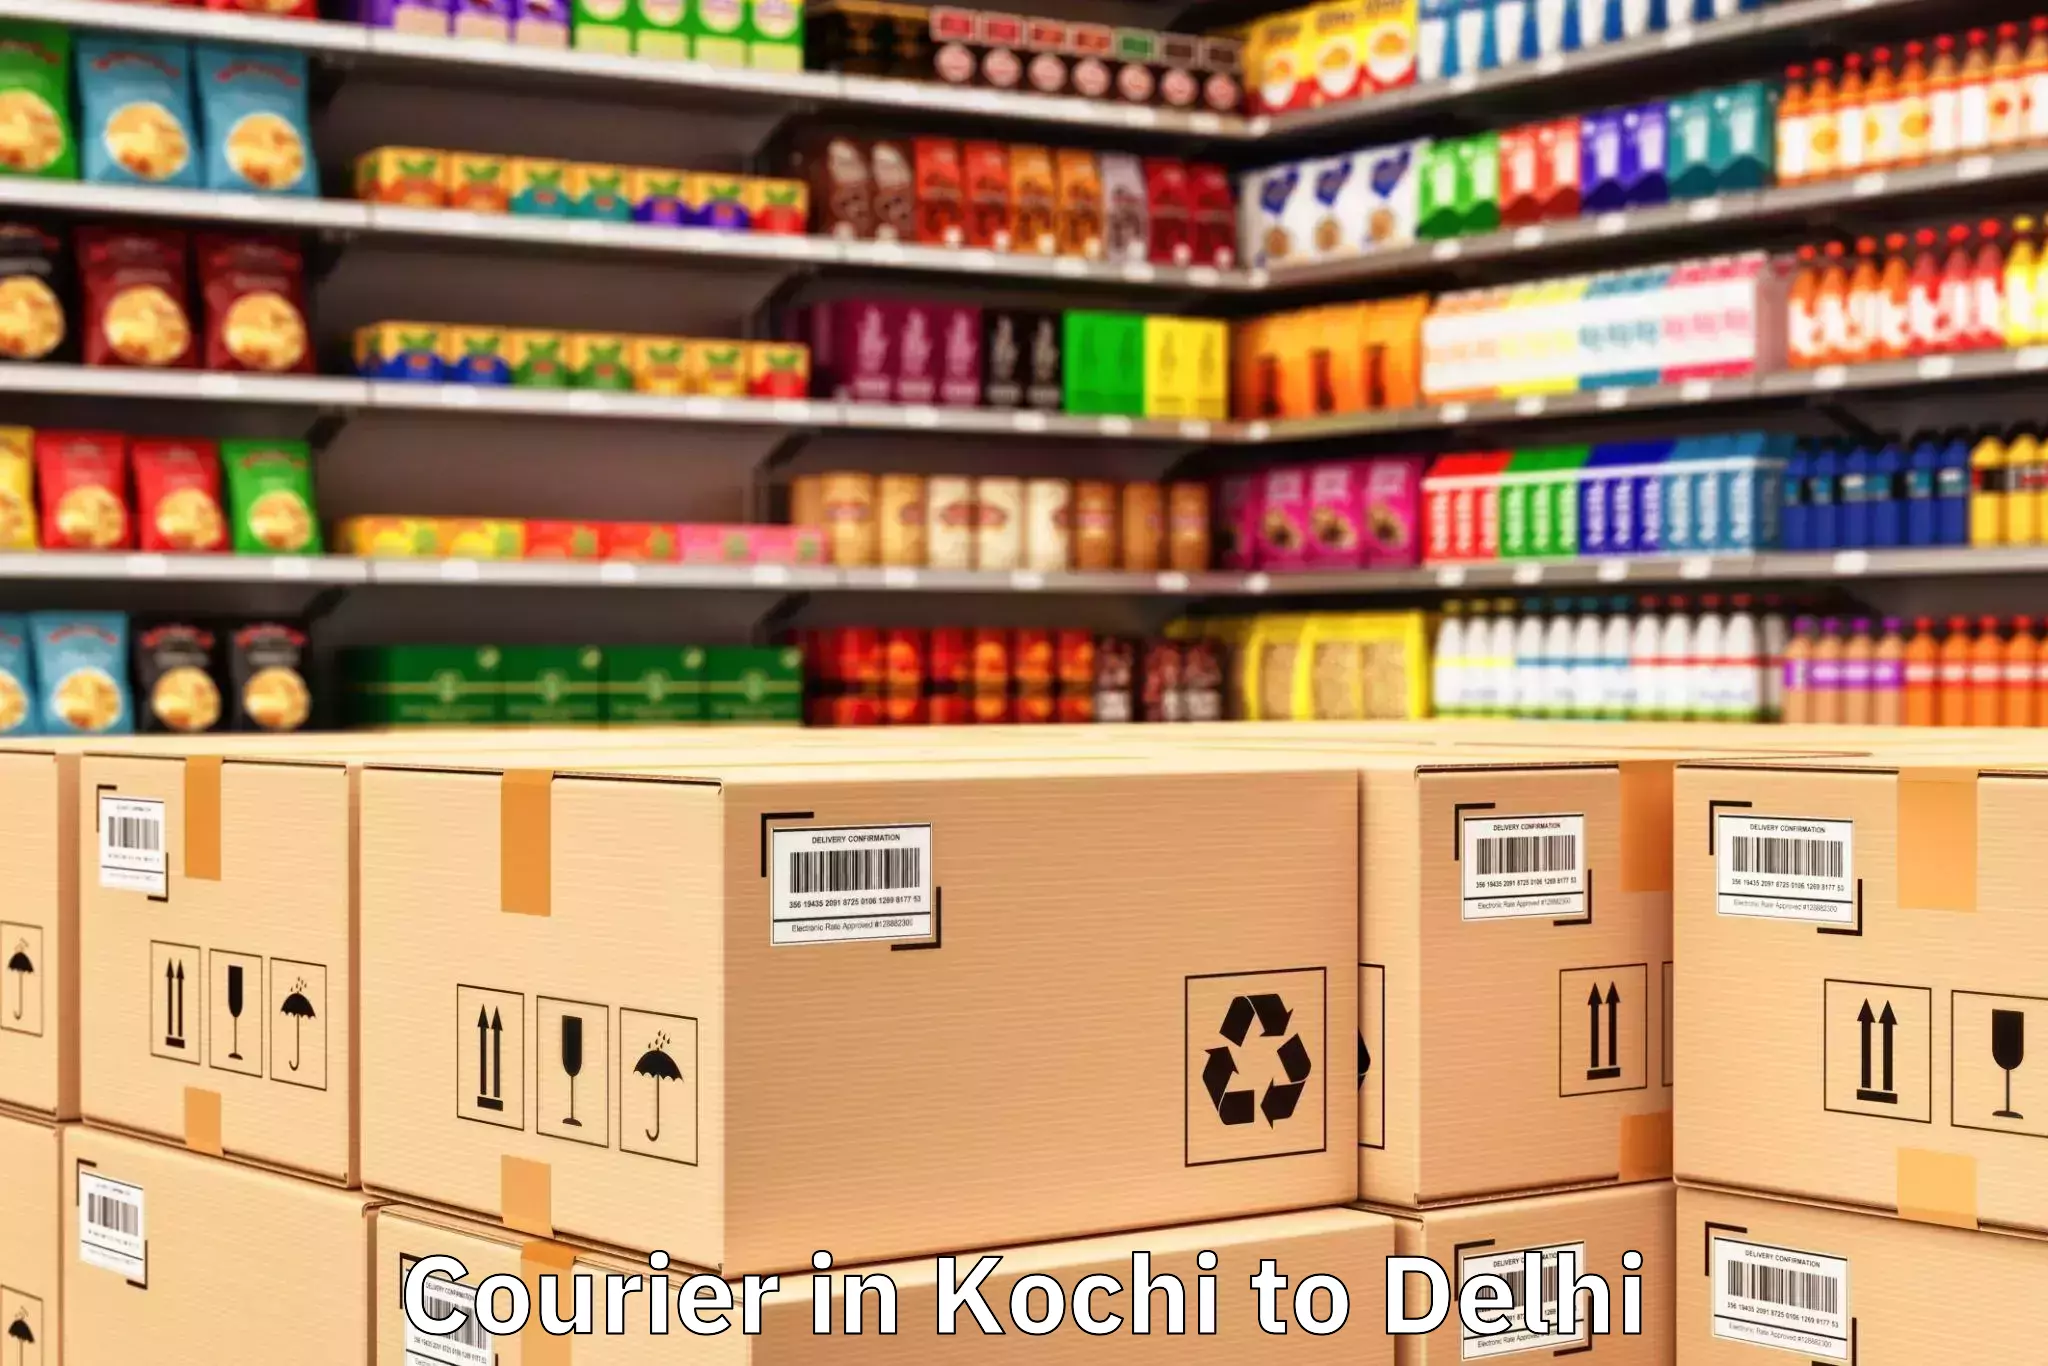 Professional Kochi to Functional Industrial Estate For Electronics Courier